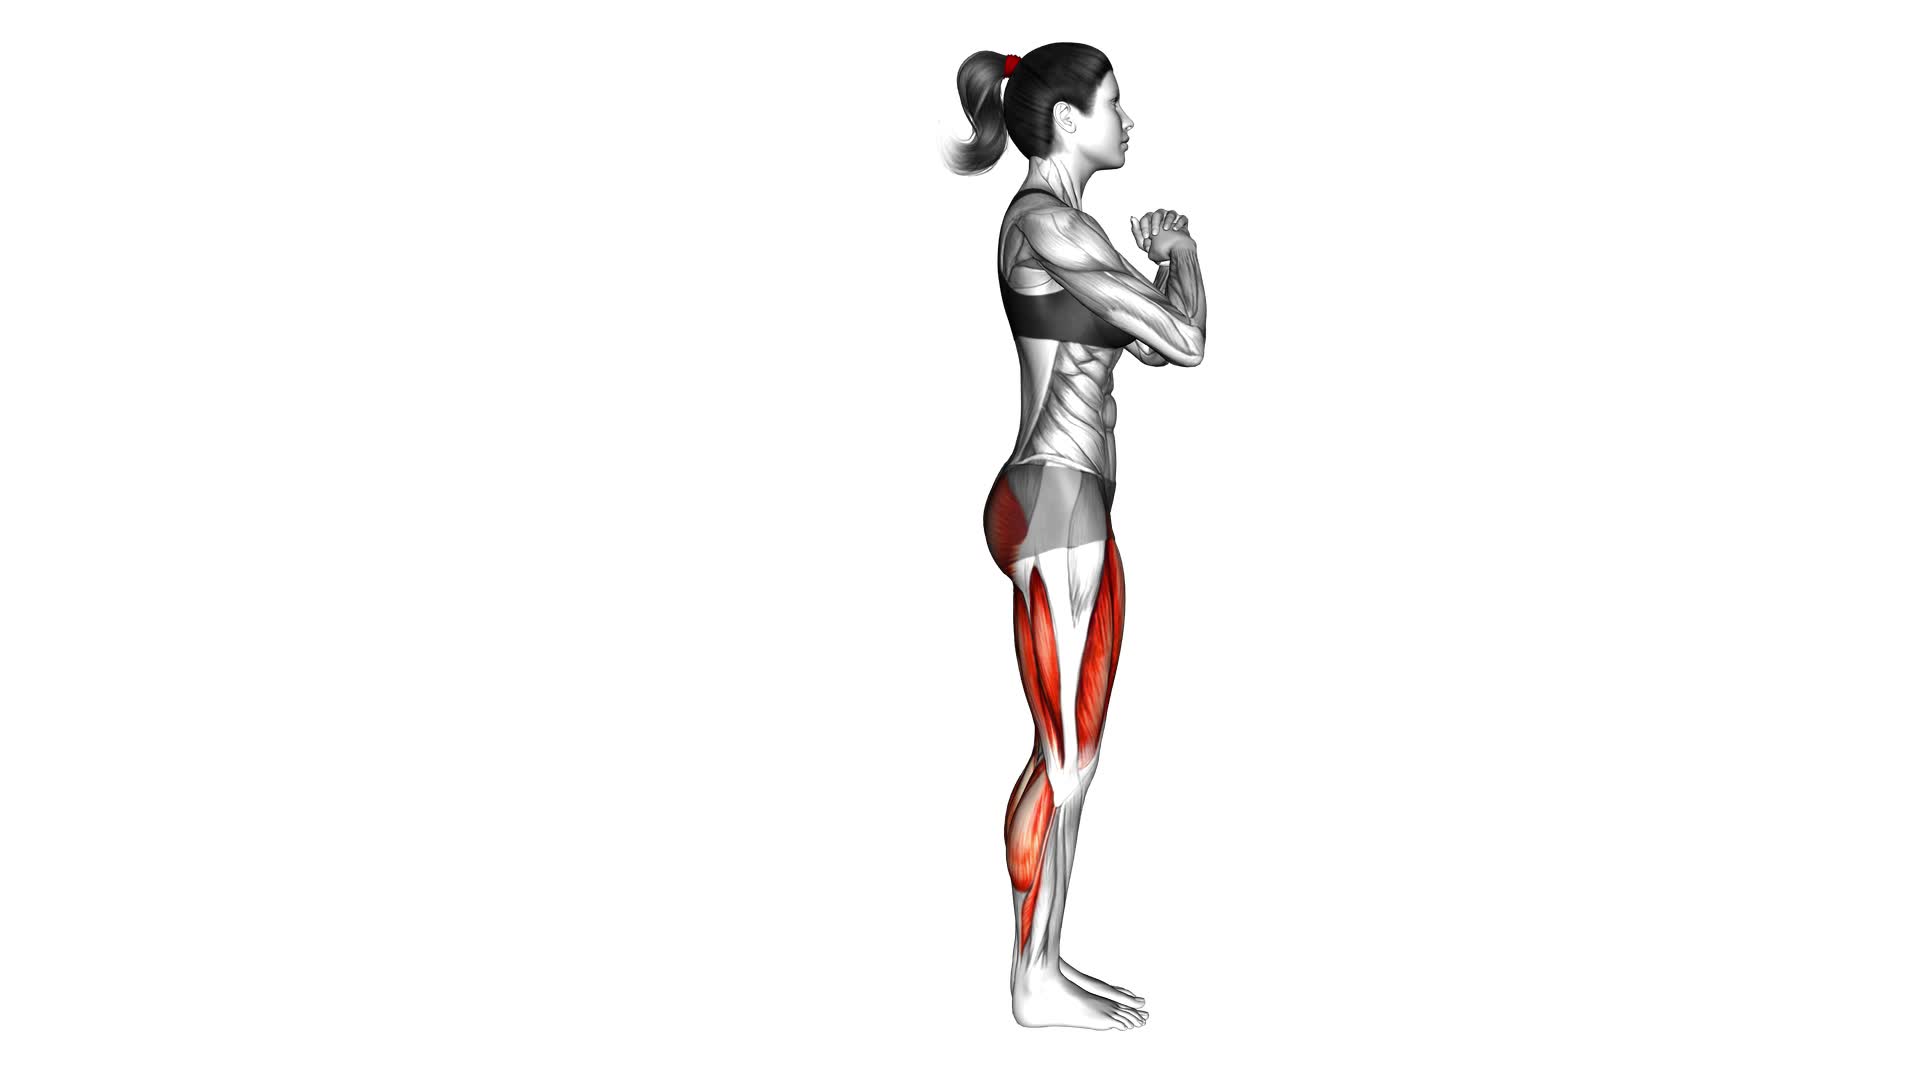 Bodyweight Reverse Lunge High Knee (female) - Video Exercise Guide & Tips